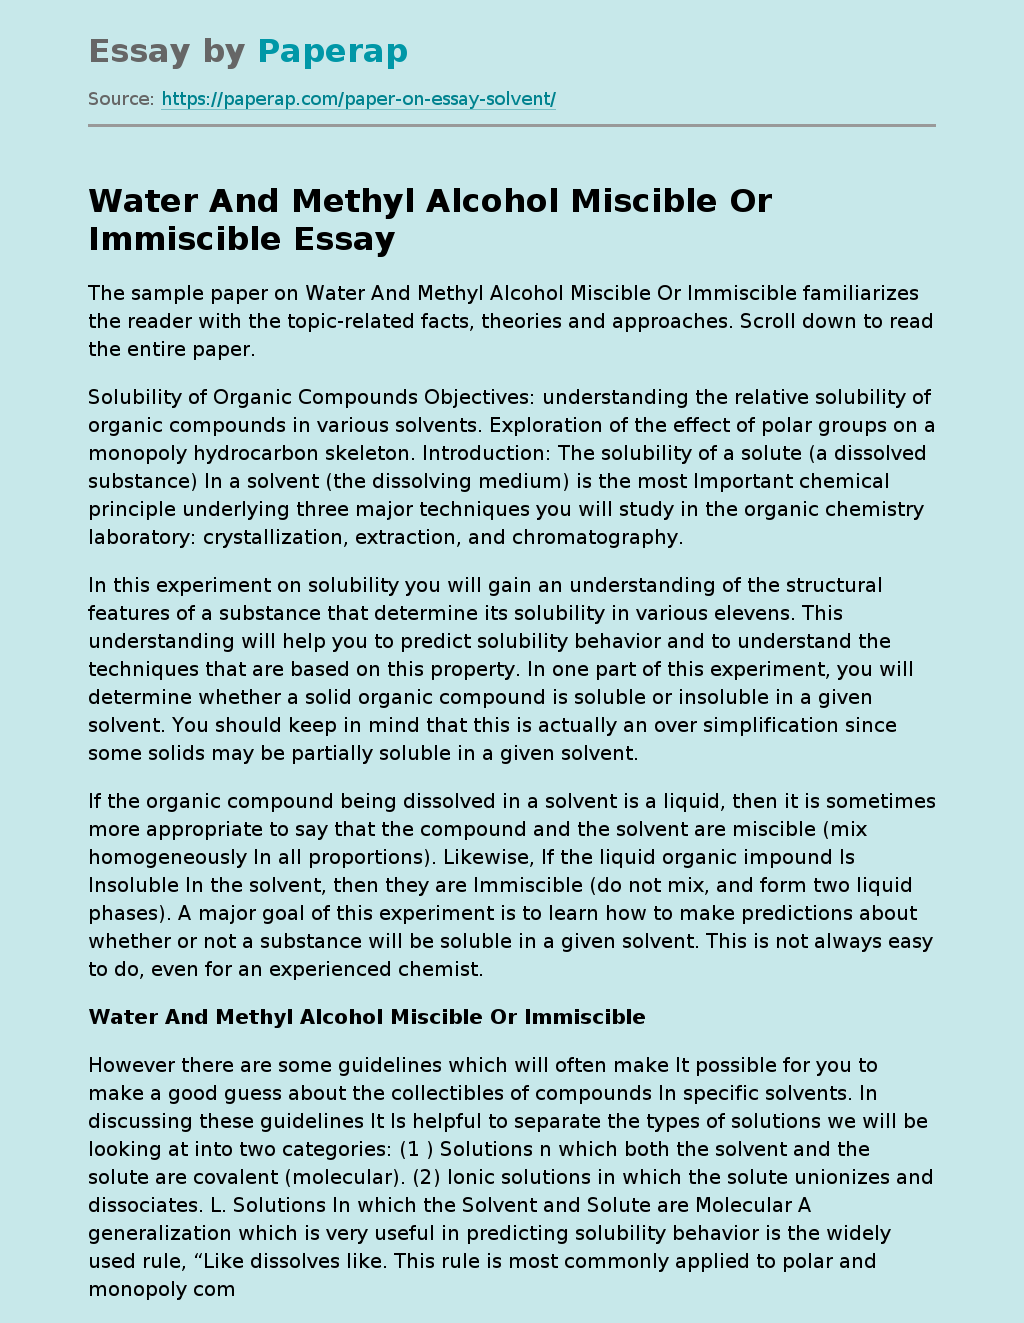 Water And Methyl Alcohol Miscible Or Immiscible